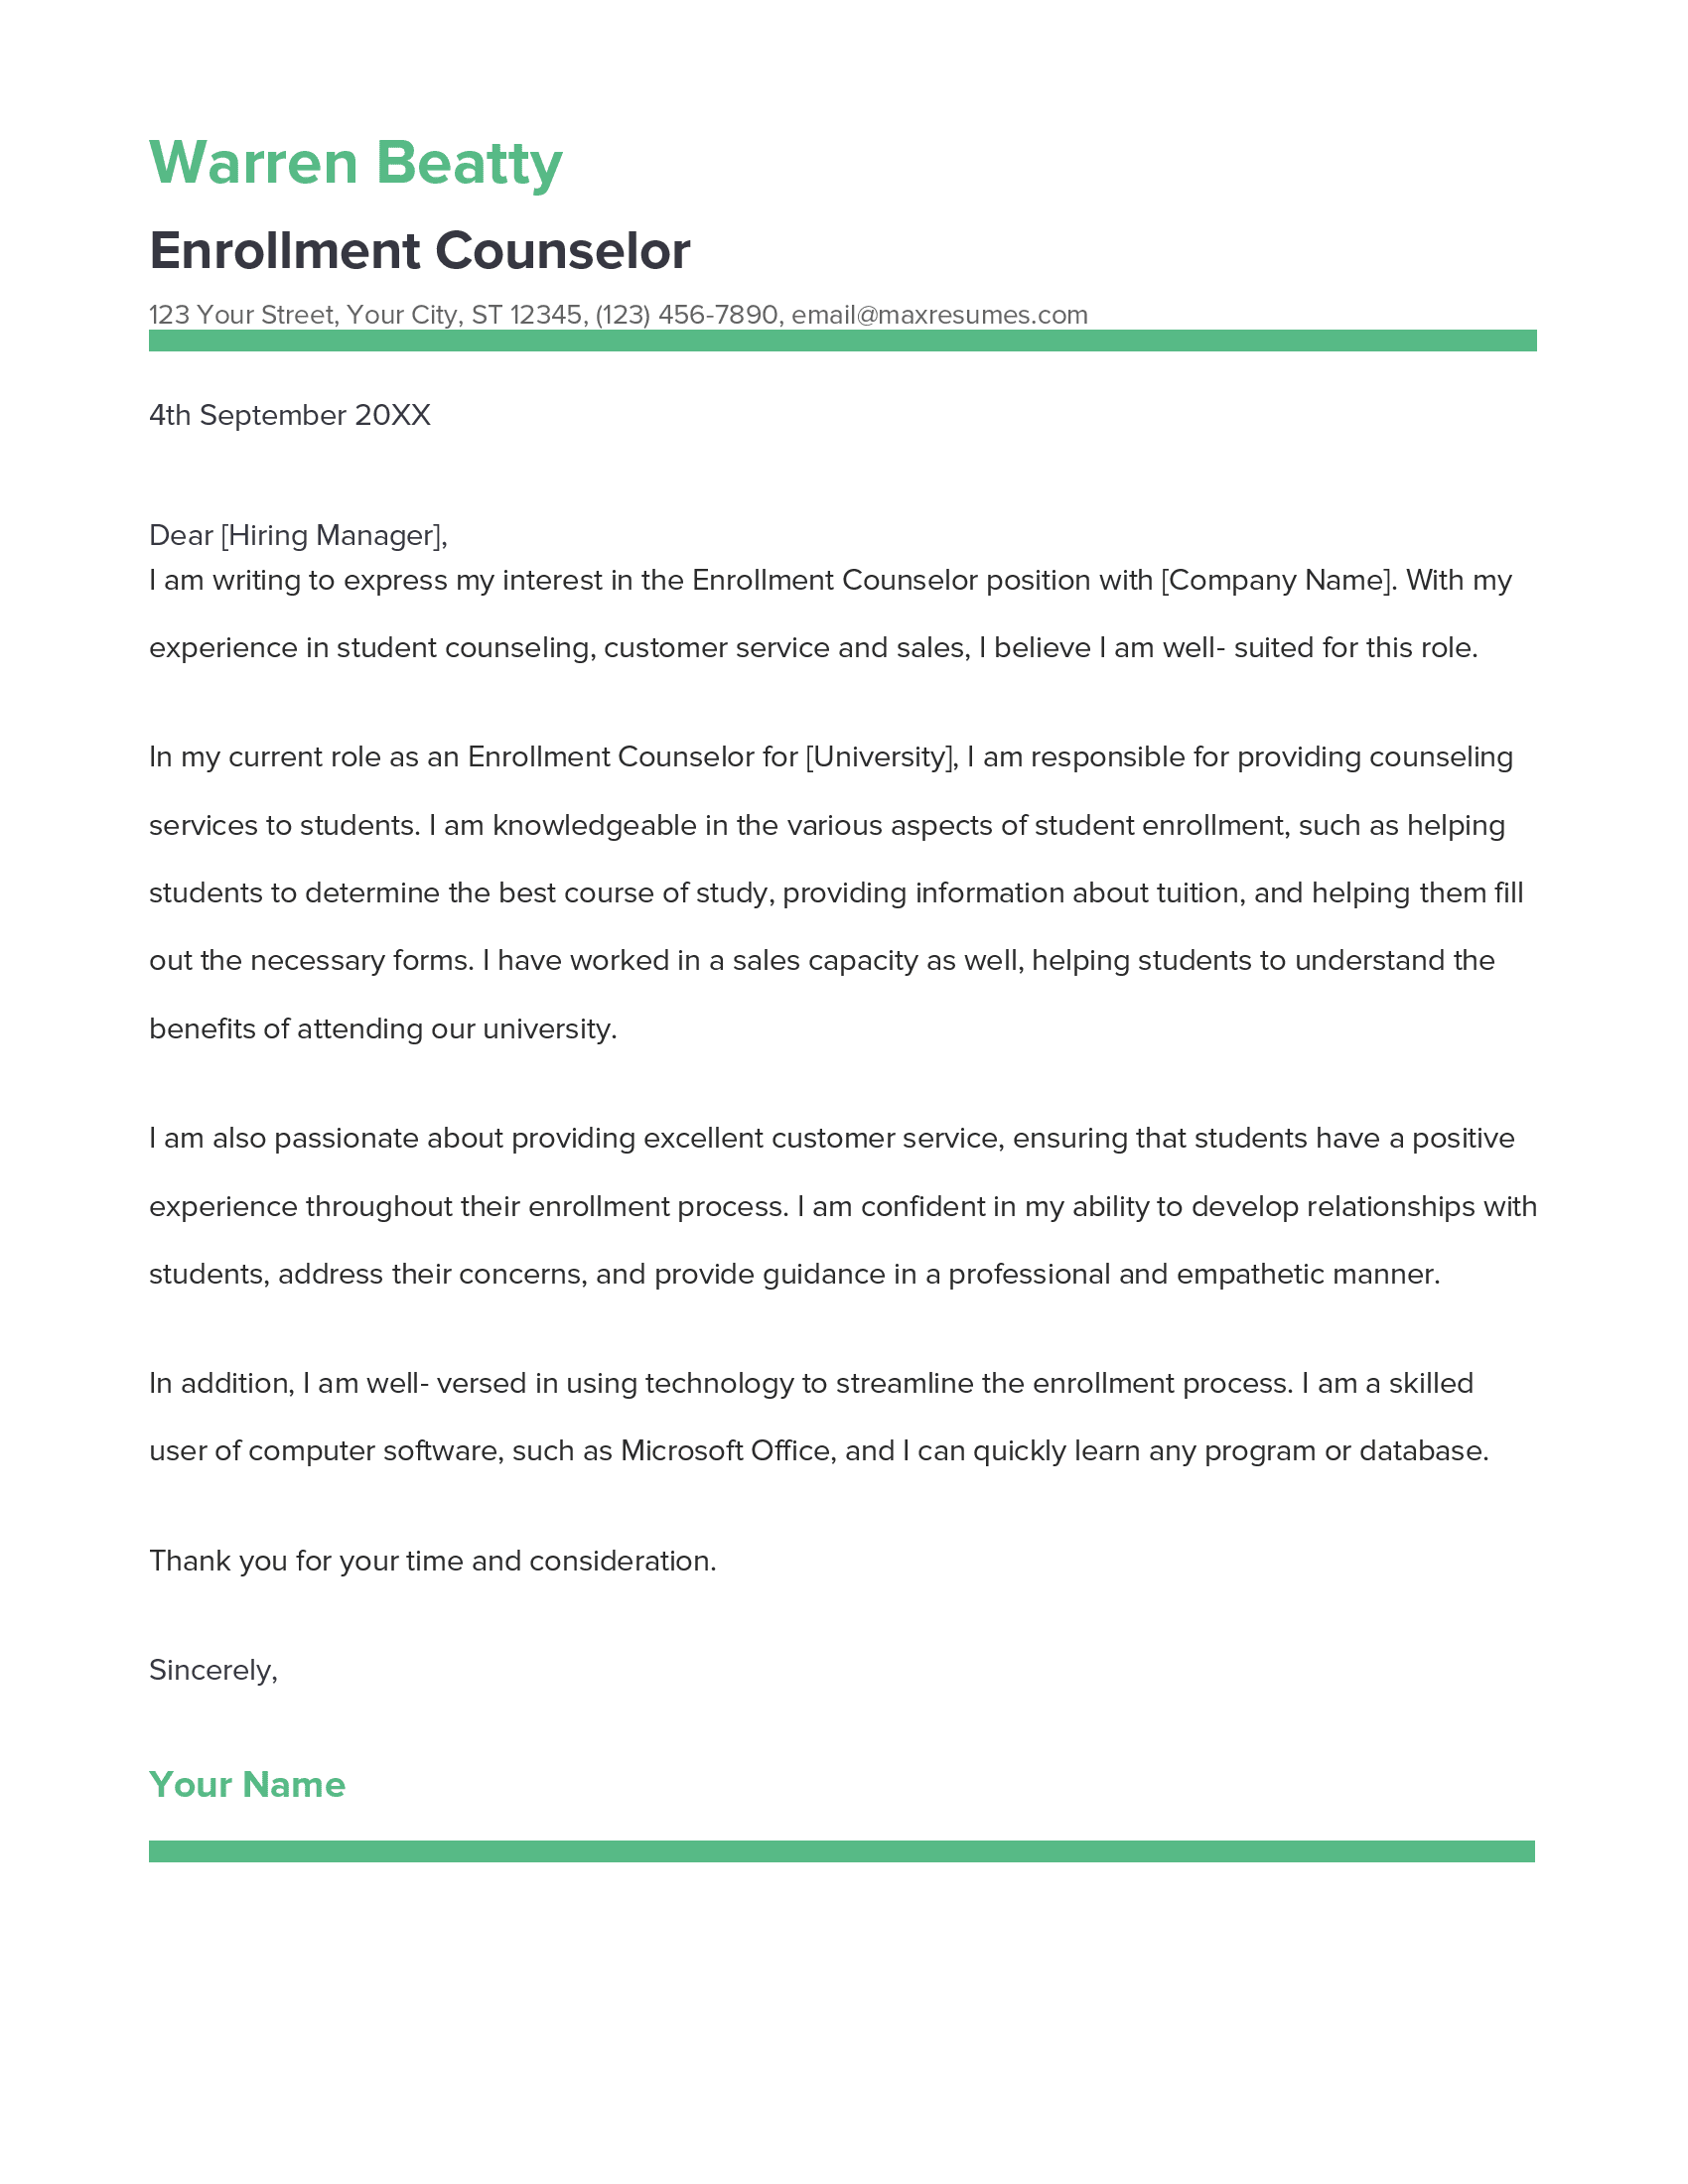 Enrollment Counselor Cover Letter Example